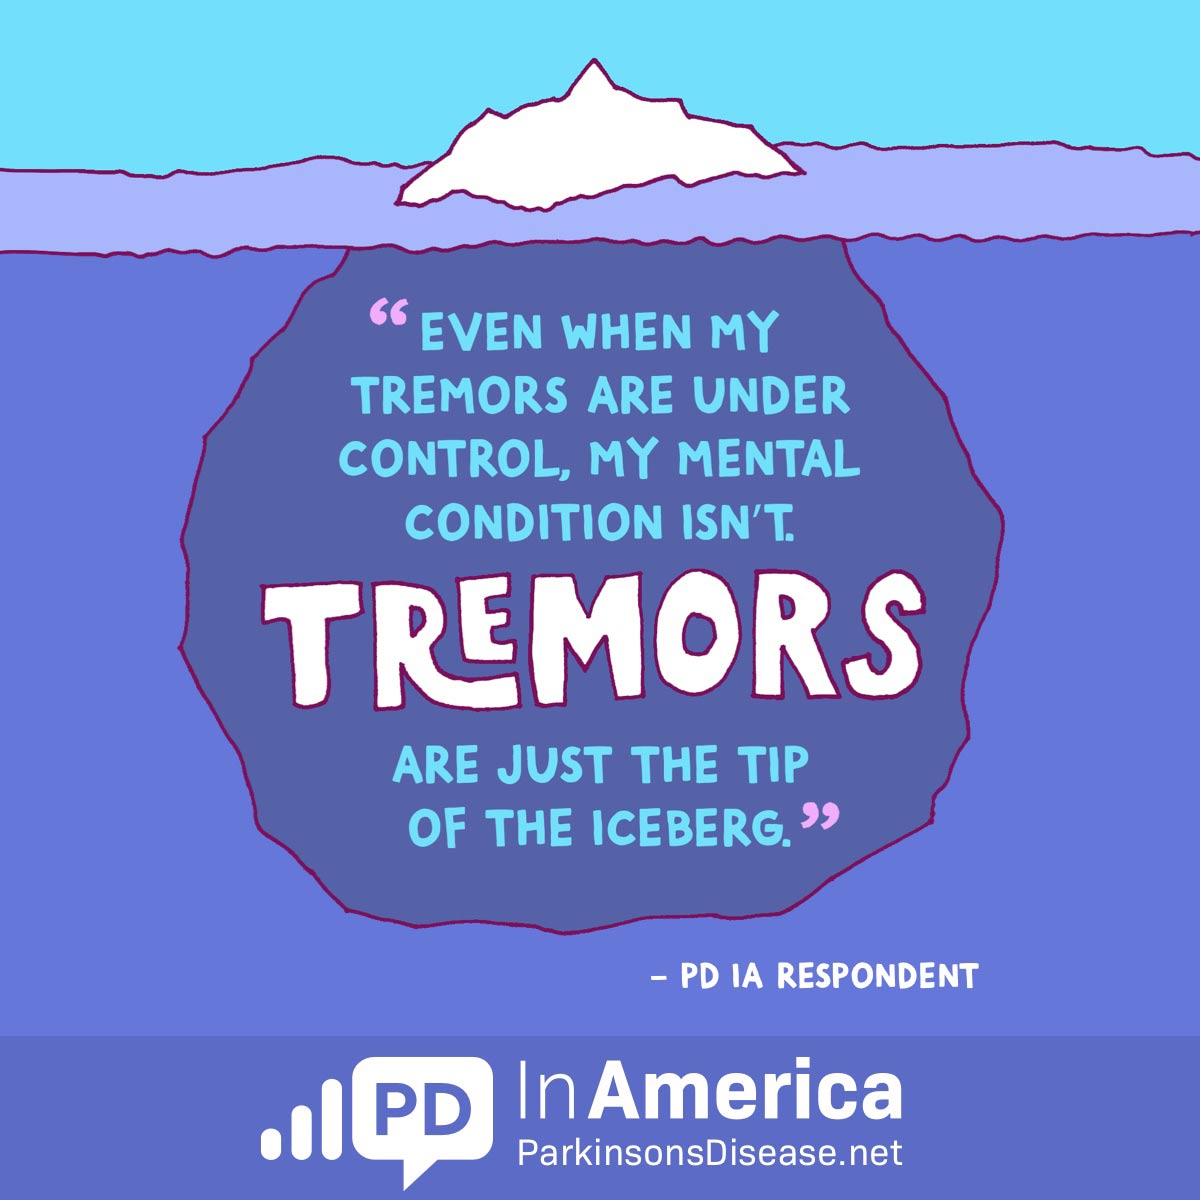 Quote from respondent indicating that tremors are just the tip of the iceberg with Parkinson's disease.